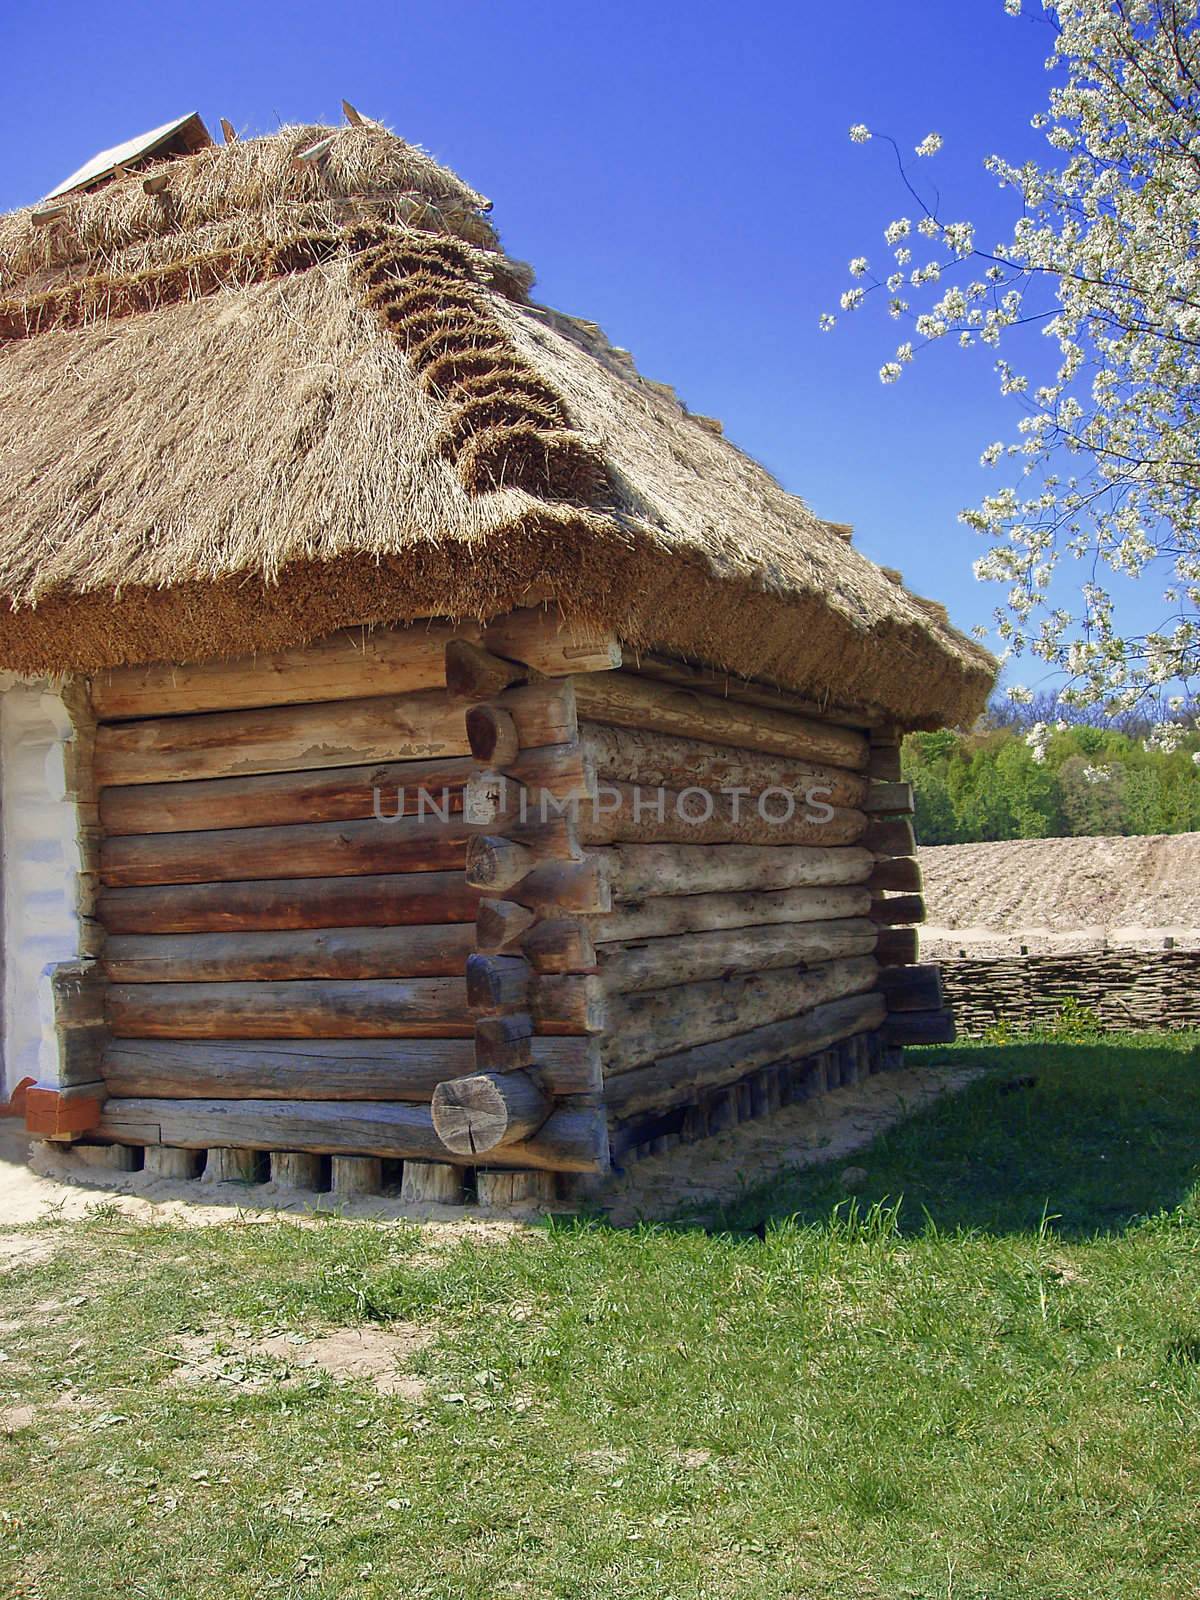 Ukrainian farmhouse under the thatched roof